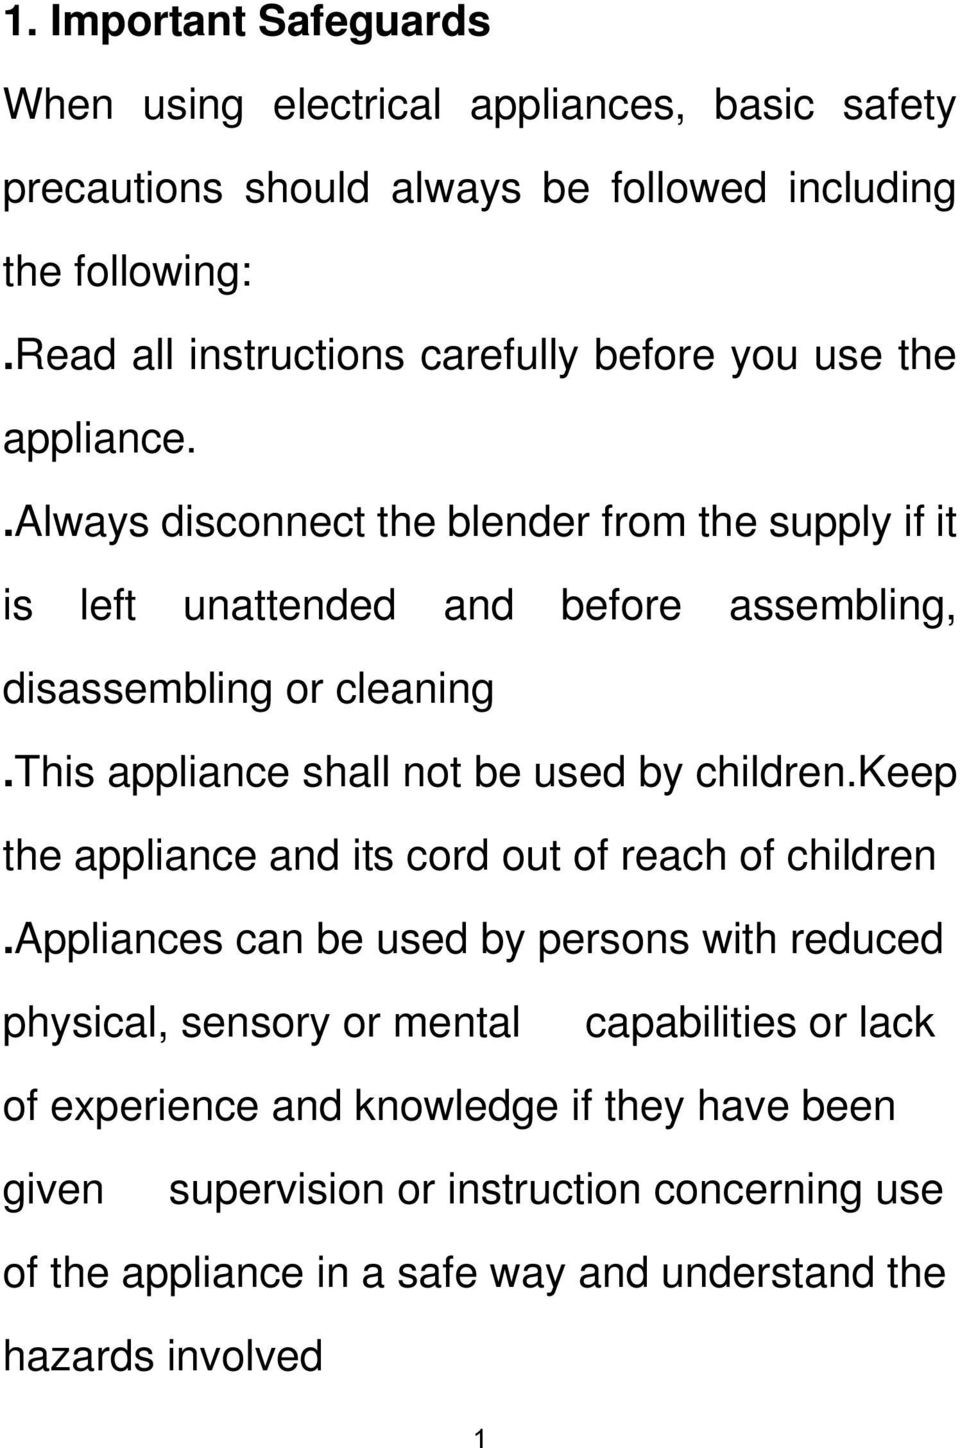 .always disconnect the blender from the supply if it is left unattended and before assembling, disassembling or cleaning.this appliance shall not be used by children.